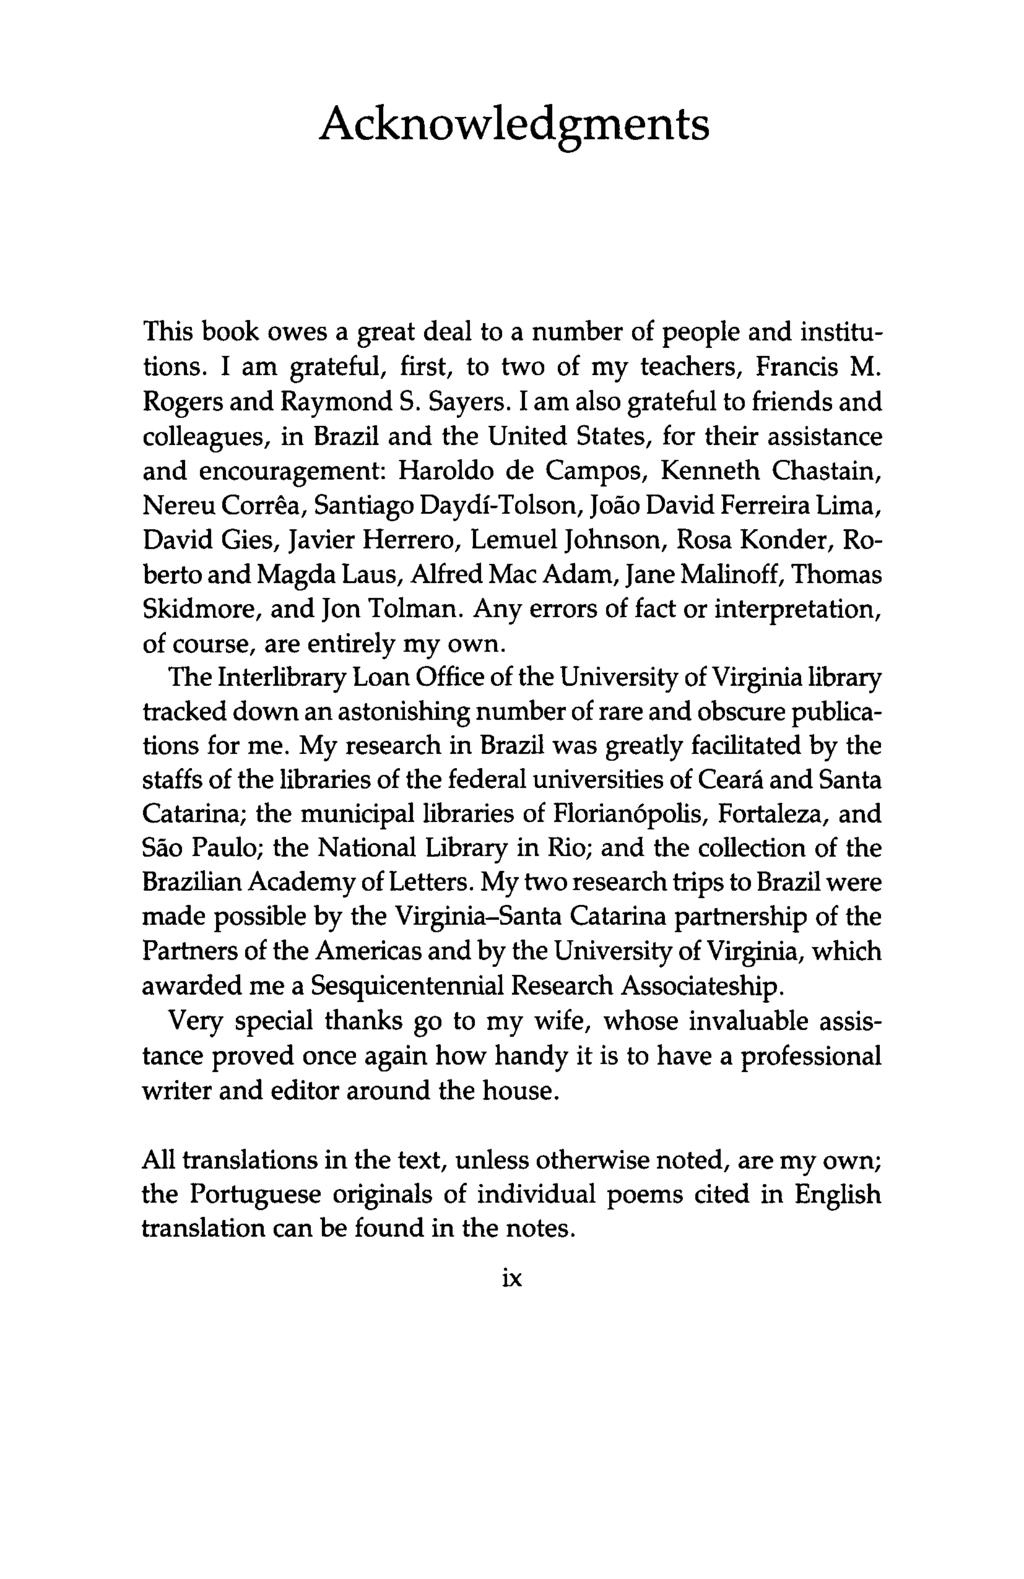 Acknowledgments This book owes a great deal to a number of people and institutions. I am grateful, first, to two of my teachers, Francis M. Rogers and Raymond S. Sayers.